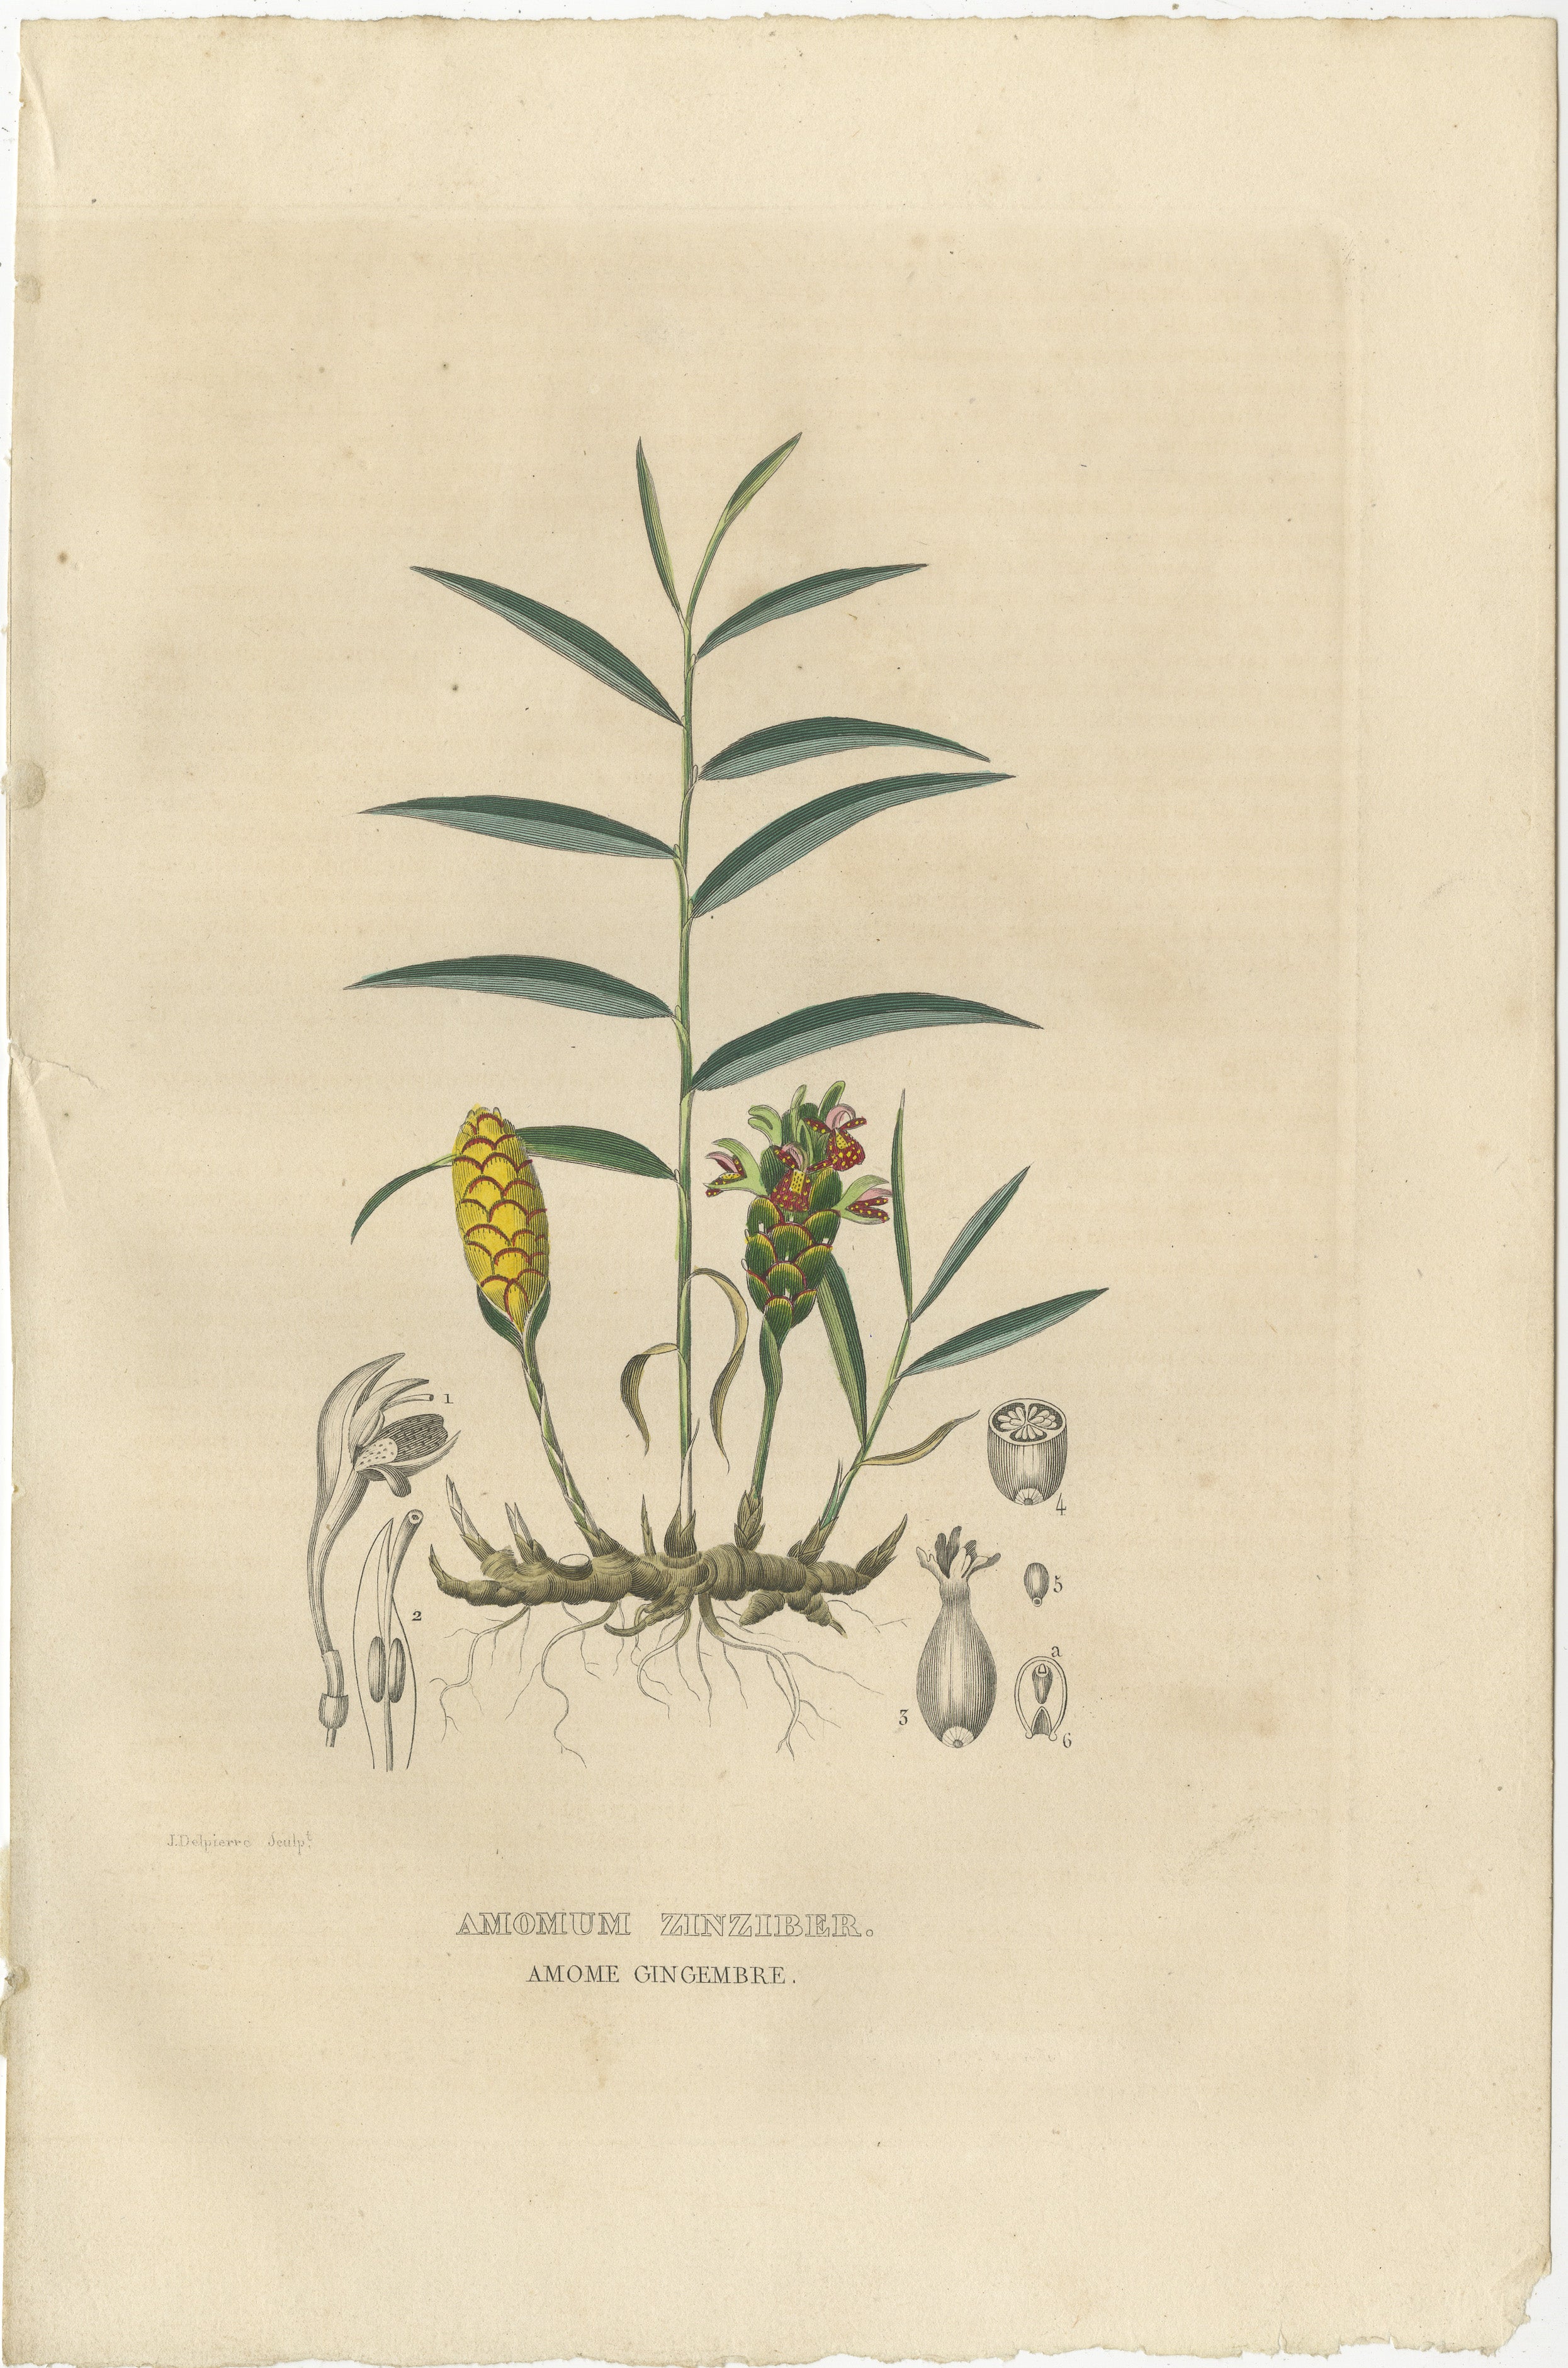 Antique botanical engraving of Amomum zinziber, better known as ginger. The engraving shows various parts of the ginger plant in a detailed, scientific illustration style typical of historical botanical texts.

At the center is the mature plant,